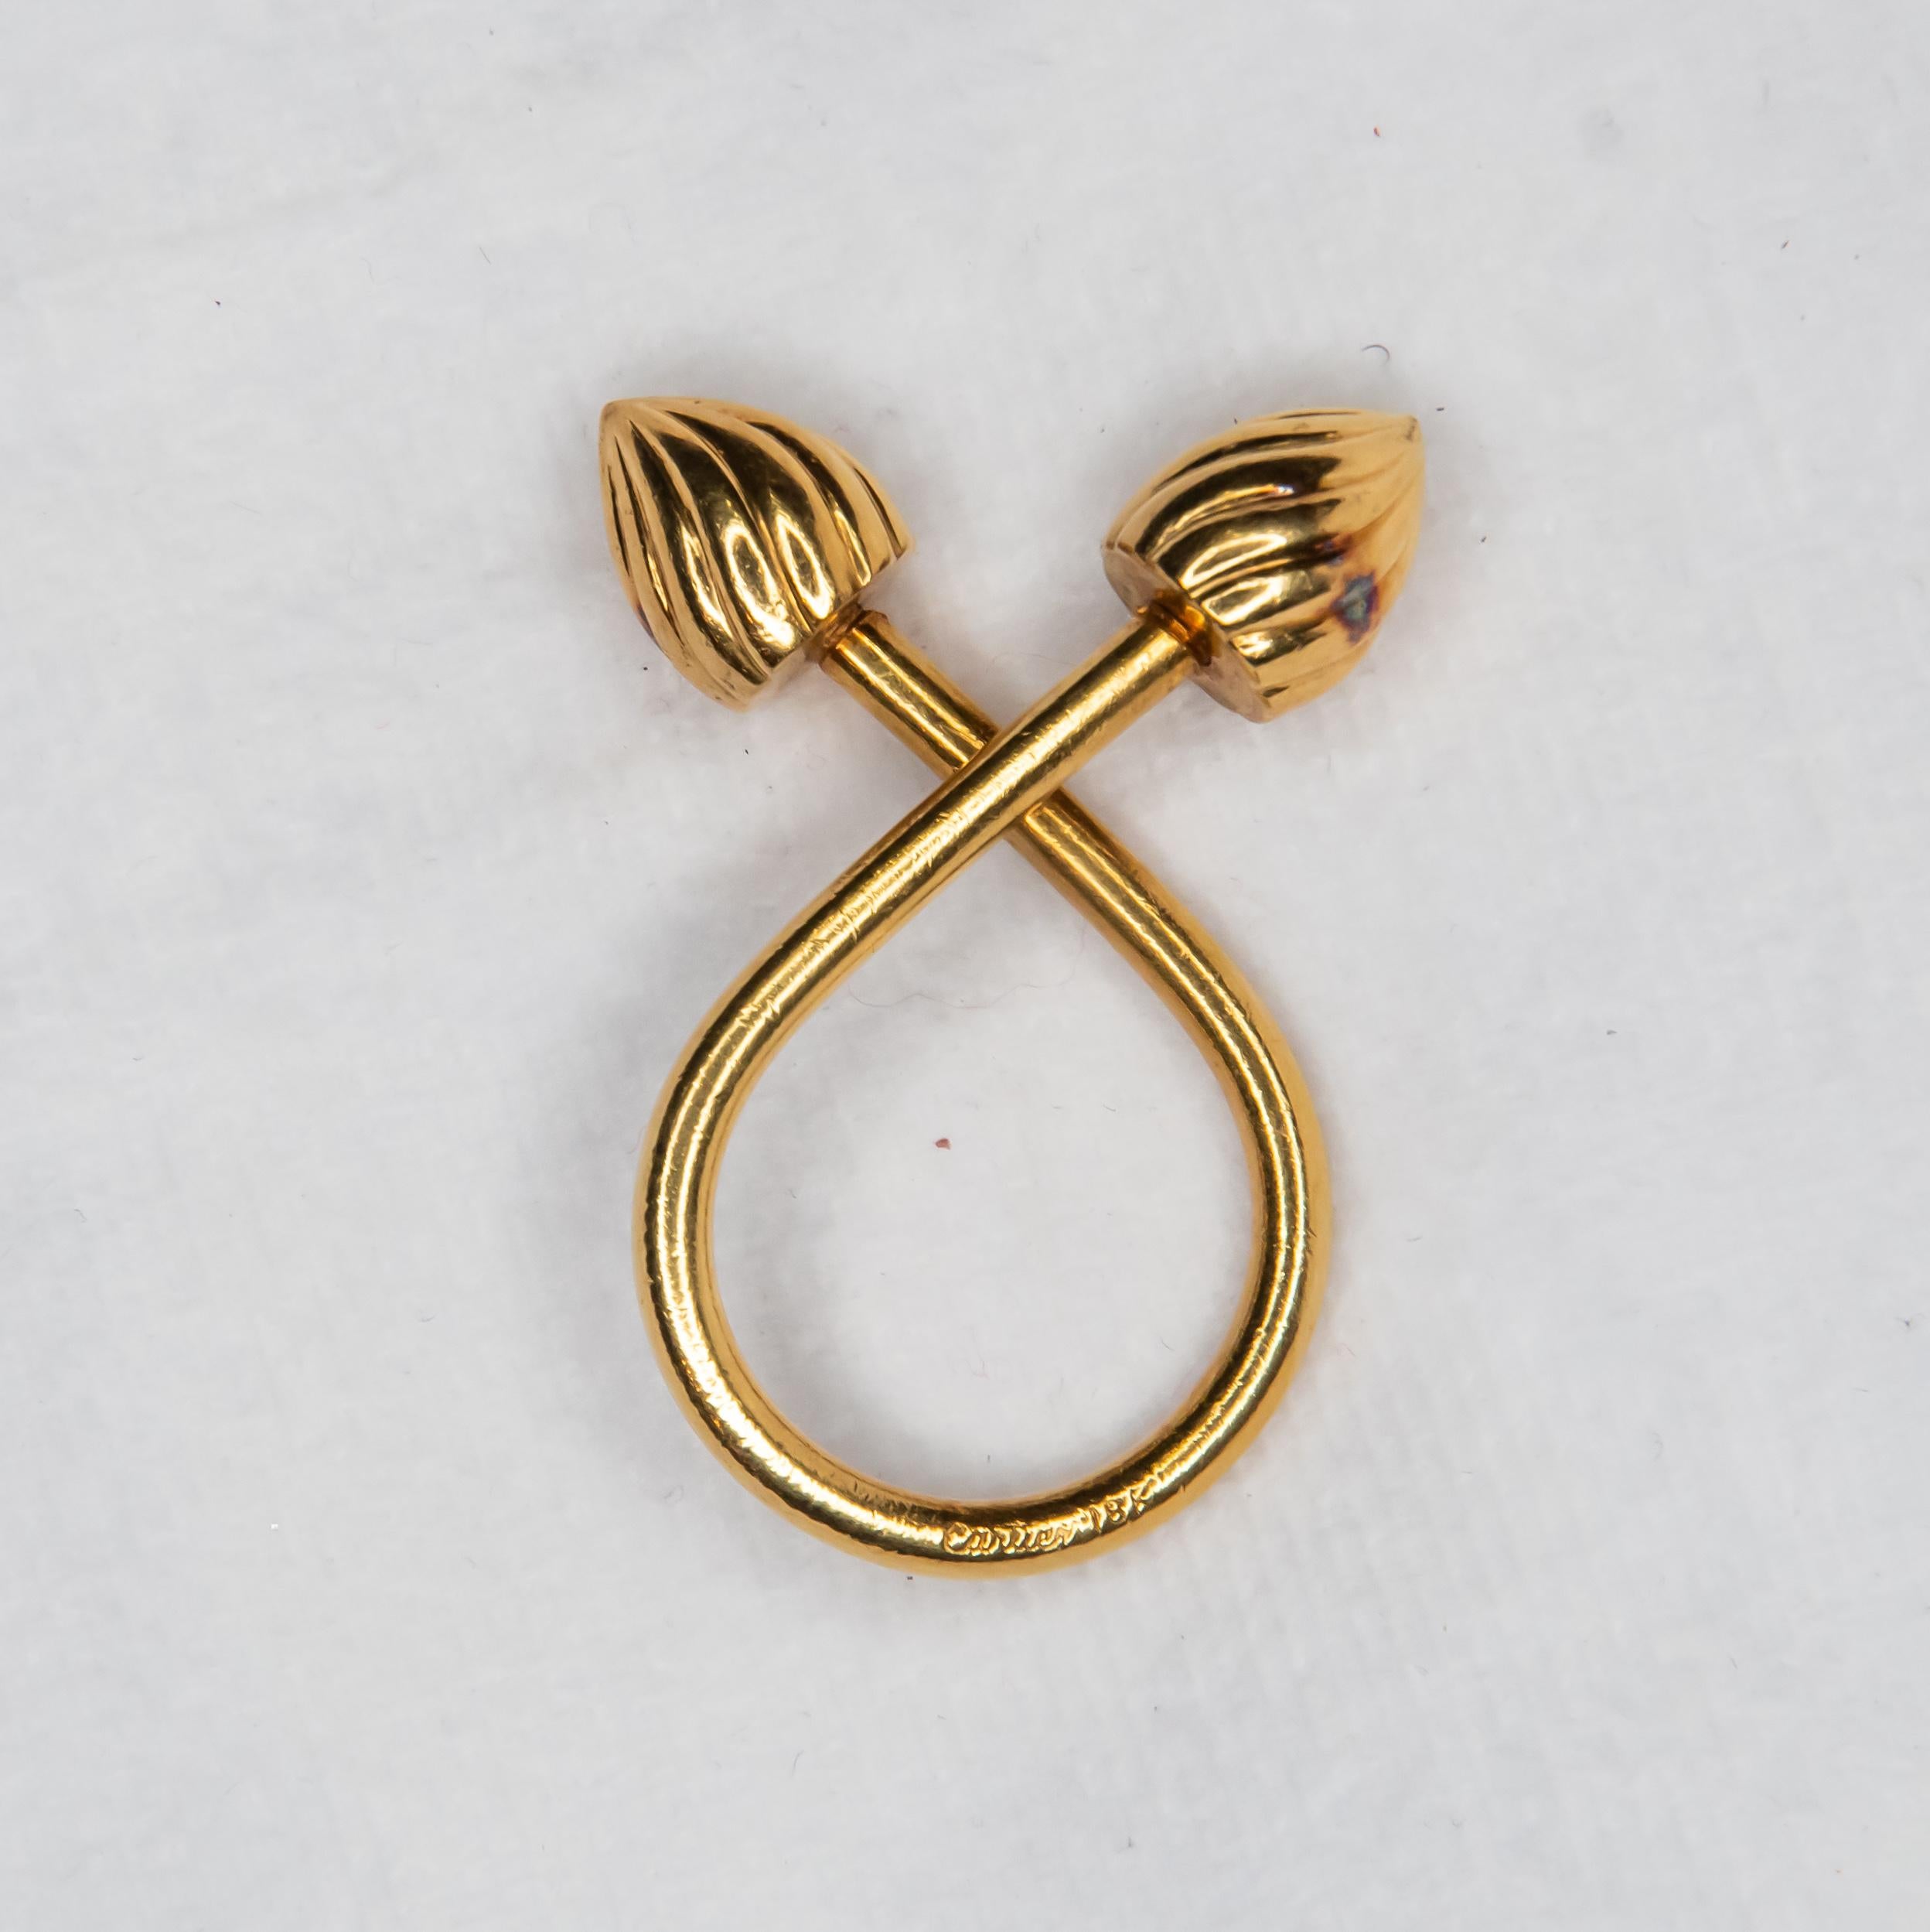 Definitely one of the most recognized names in the world.  Cartier.  We present a vintage unique and very rare fluted top key holder from this famous house.  Crafted in 18 karat yellow gold, the key holder is curved with two fluted tops.  One top